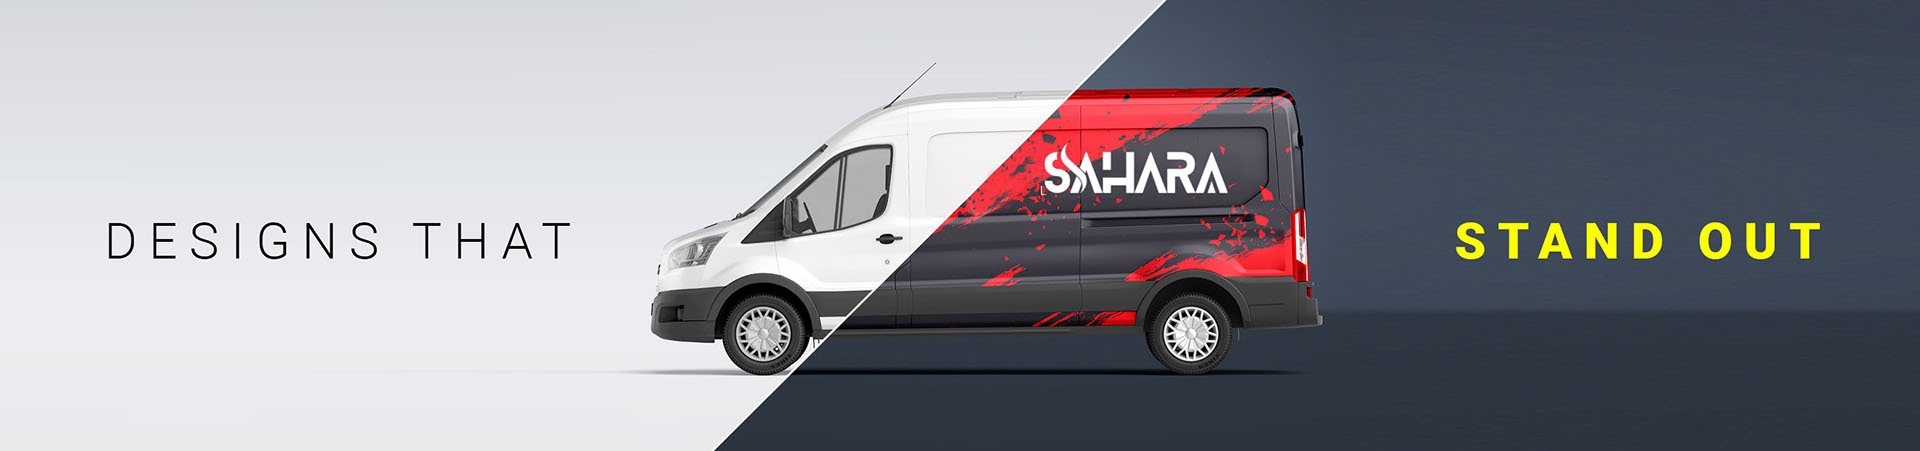 Vehicle branding and wrapping web banner for Sahara